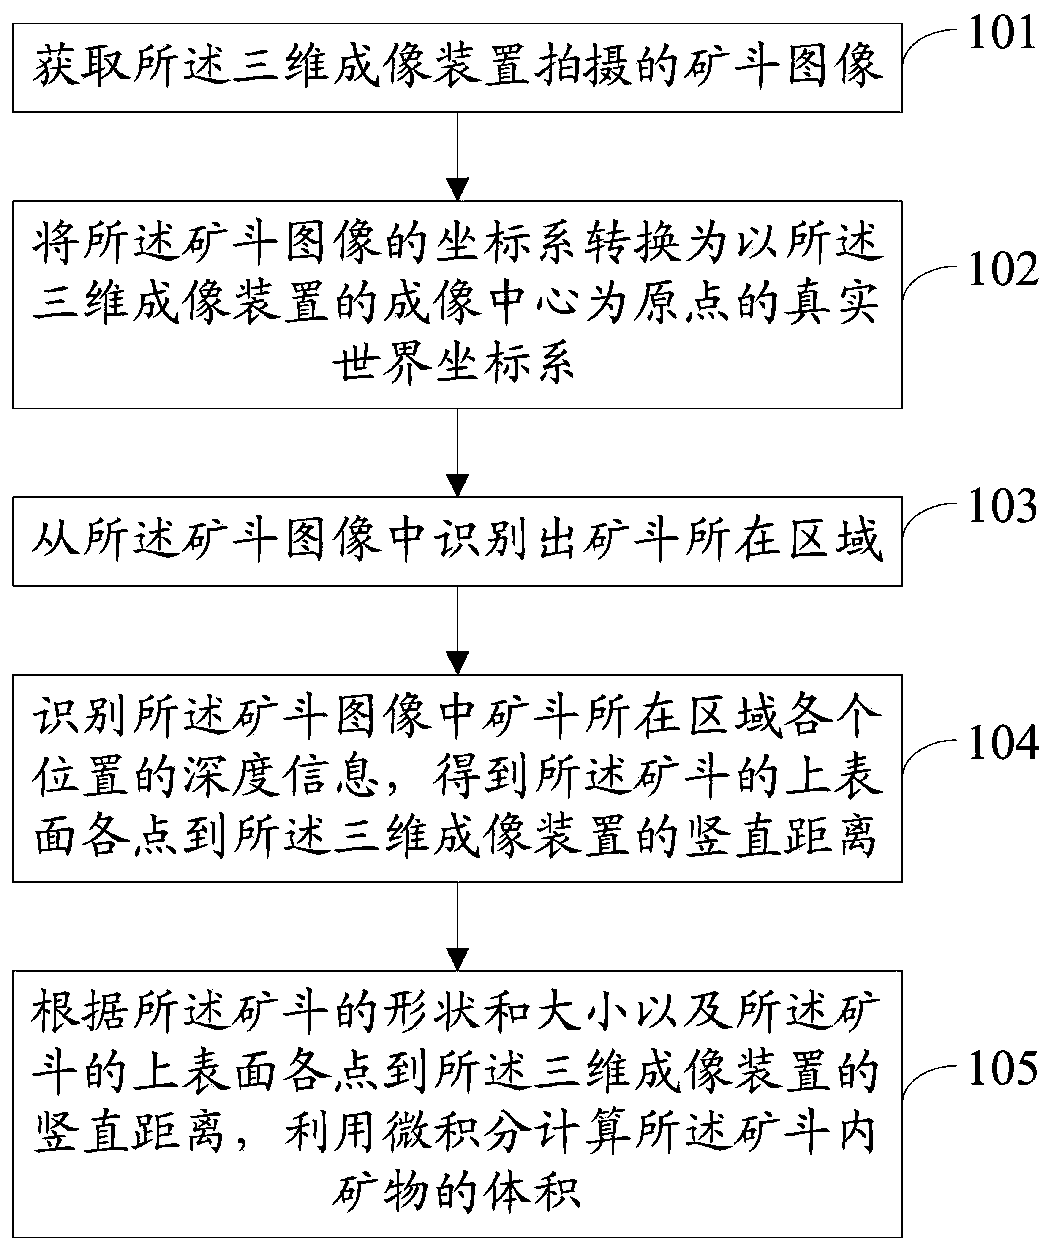 Volume measurement method and system for minerals loaded by ore bucket